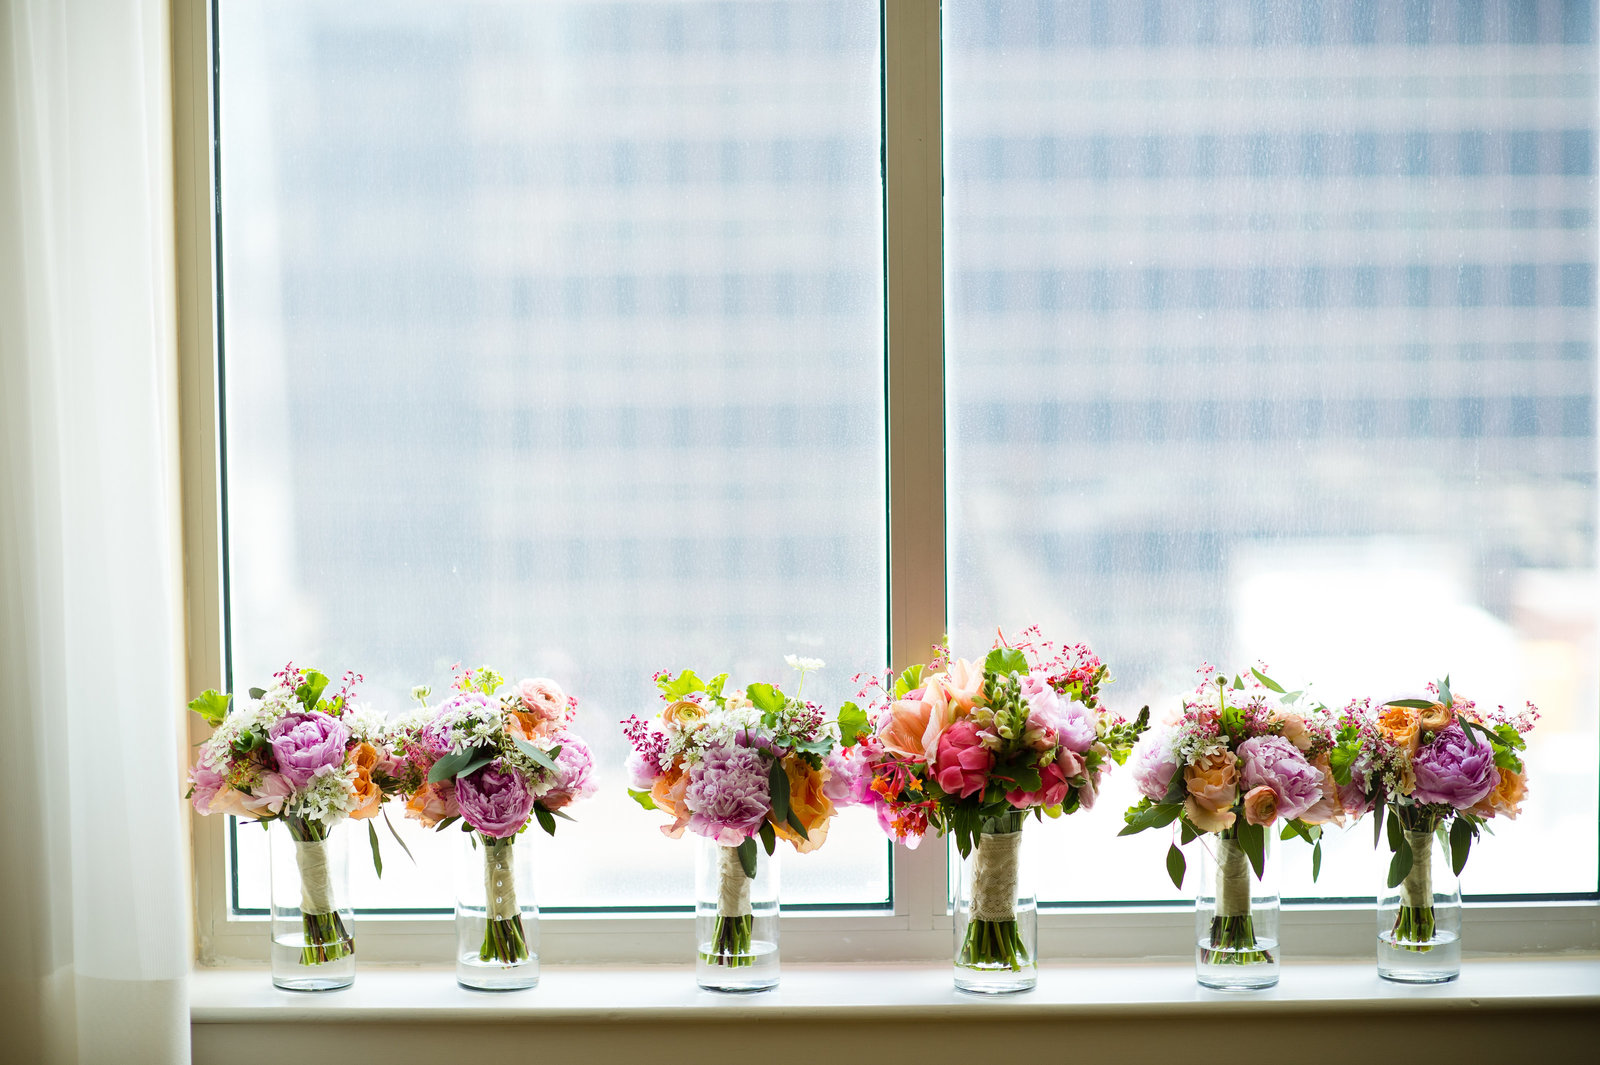 Bridal bouquet by A Garden Party Florist photo by Amanda Young Photography